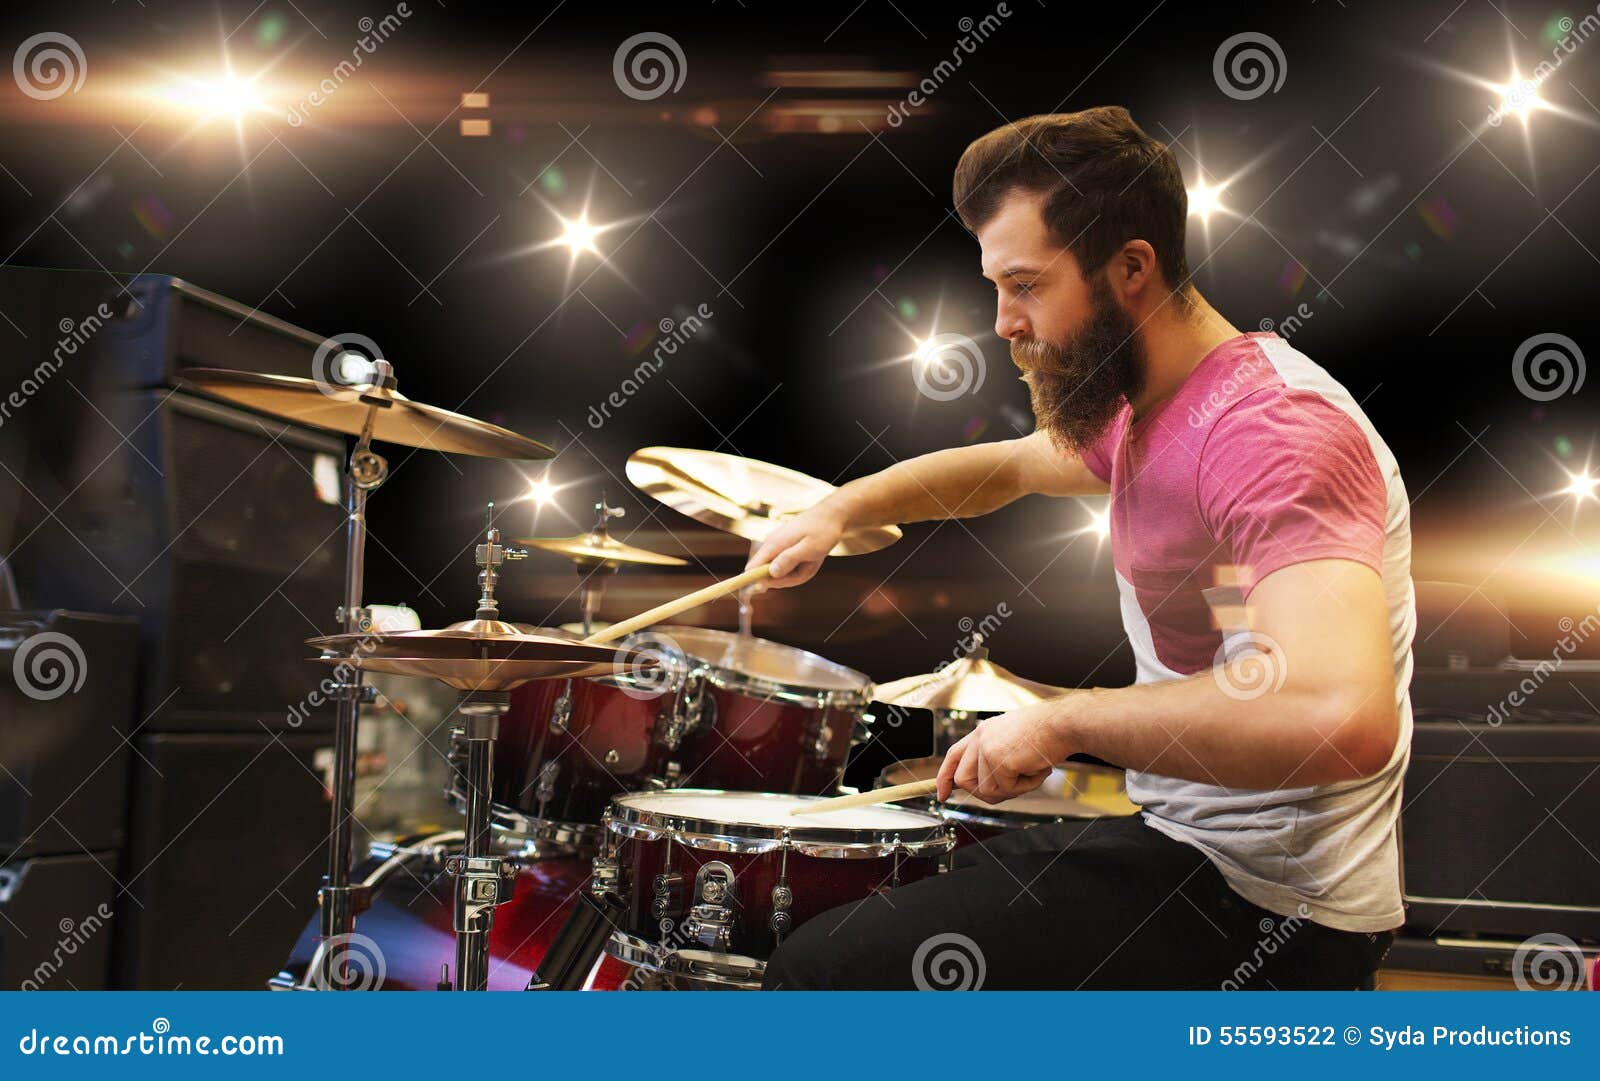 Male Musician Playing Cymbals at Music Concert Stock Photo - Image of ...